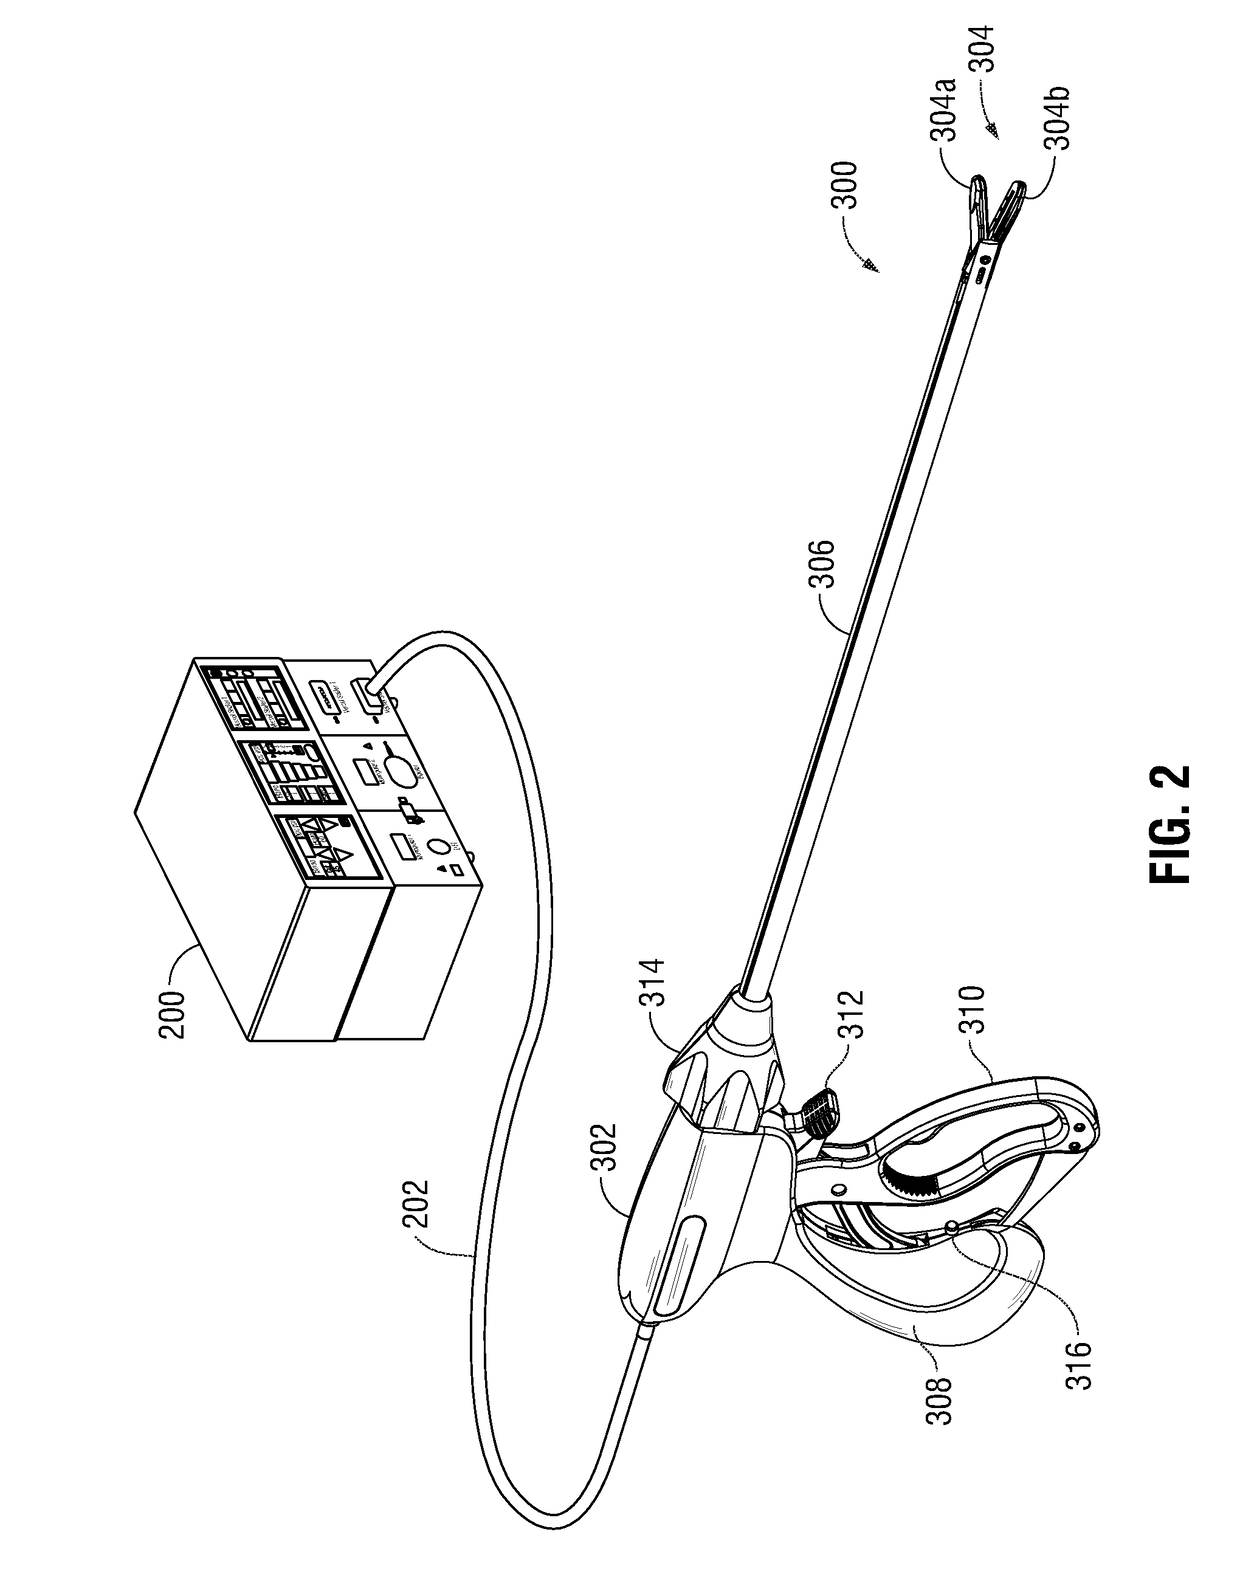 Systems and methods of tracking and analyzing use of medical instruments